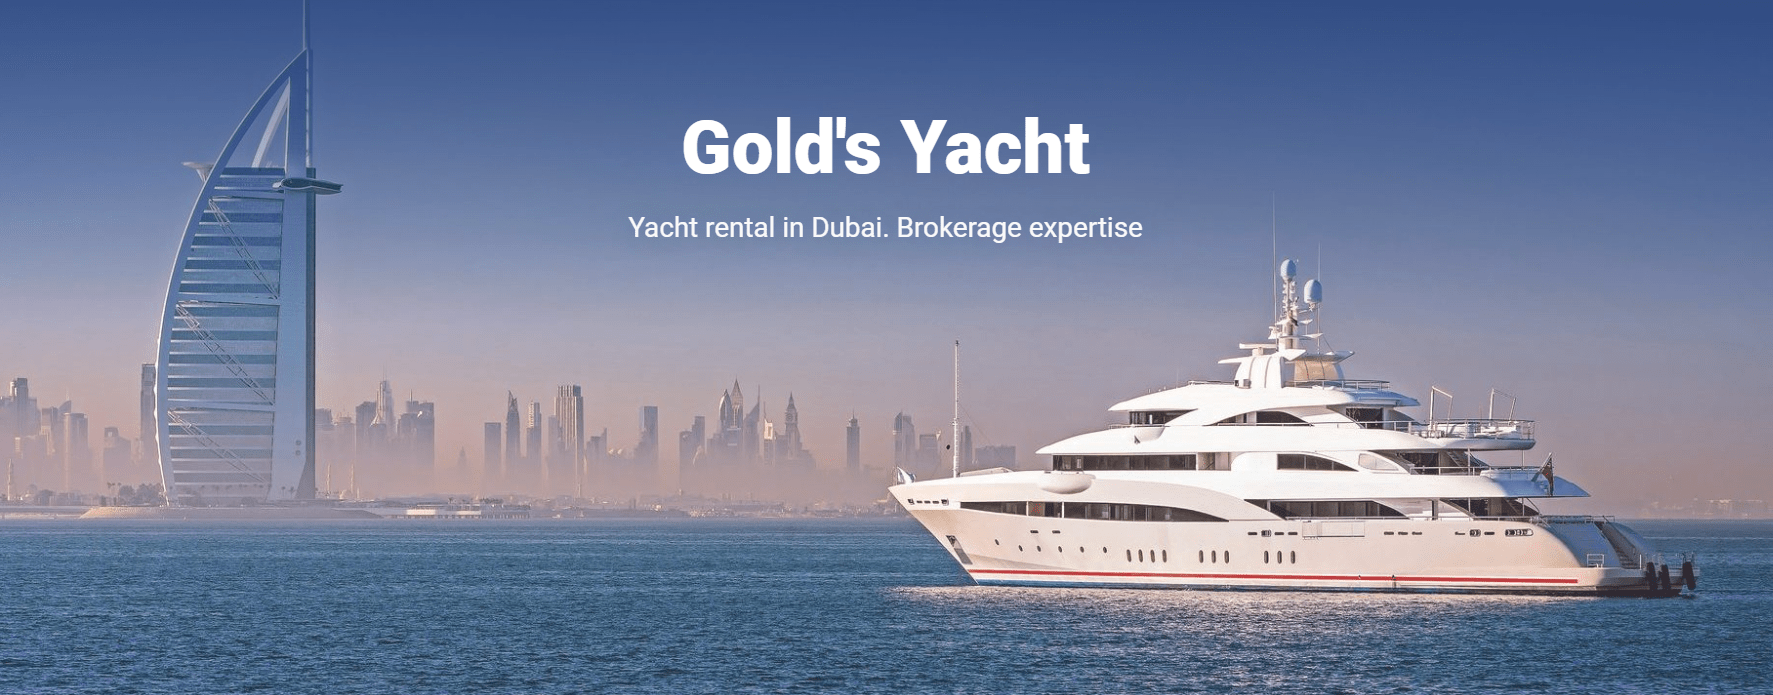 Gold's Yacht